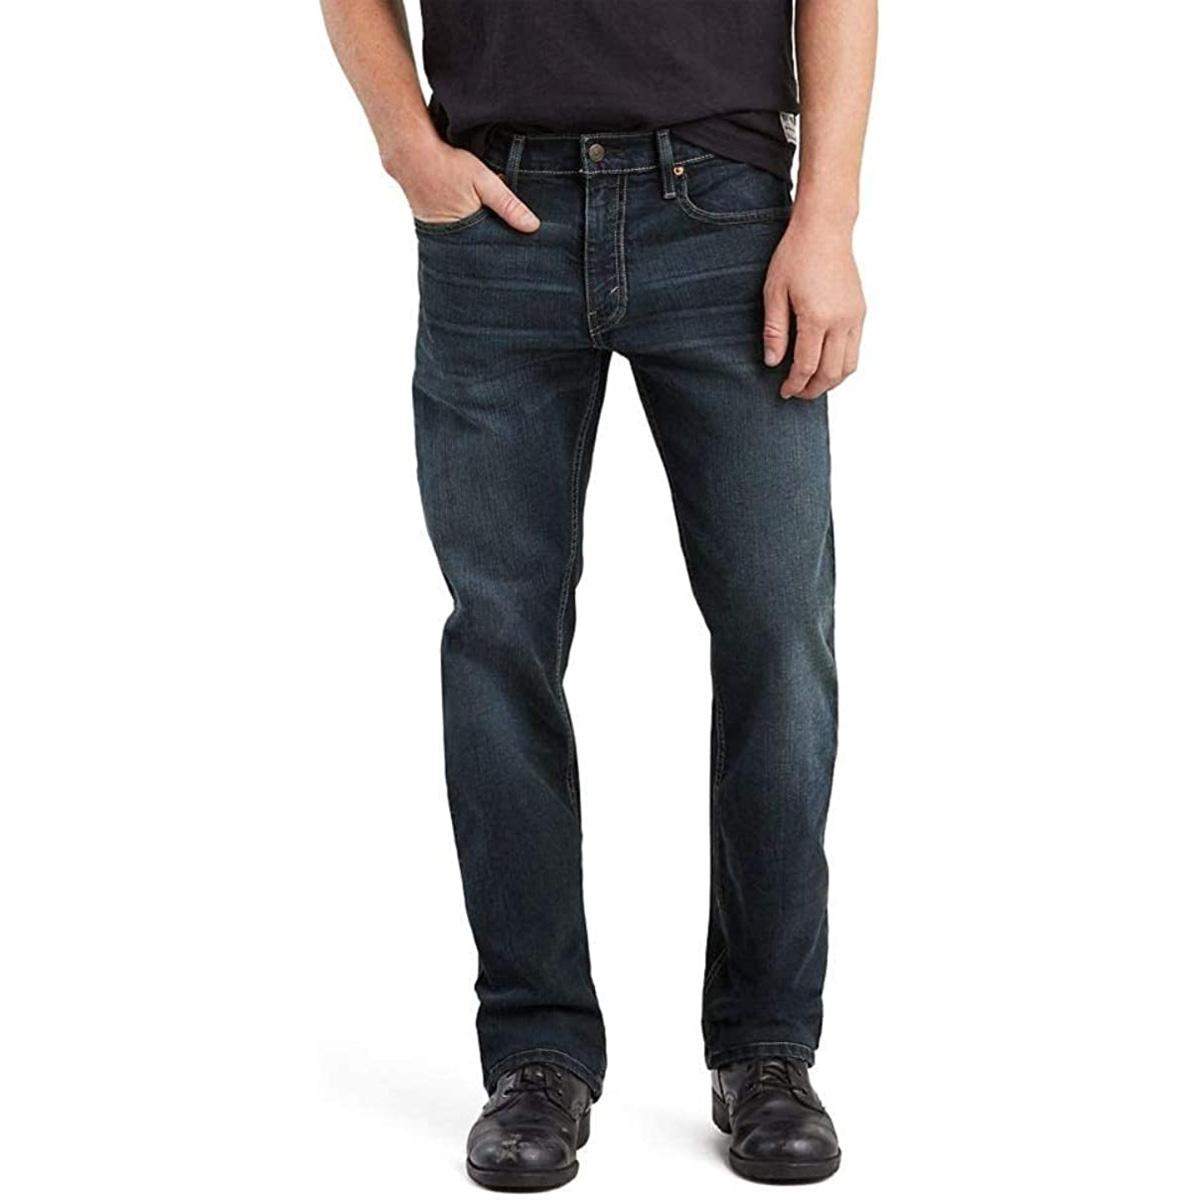 Levis Men's 559 Relaxed Straight Jeans for $23.47